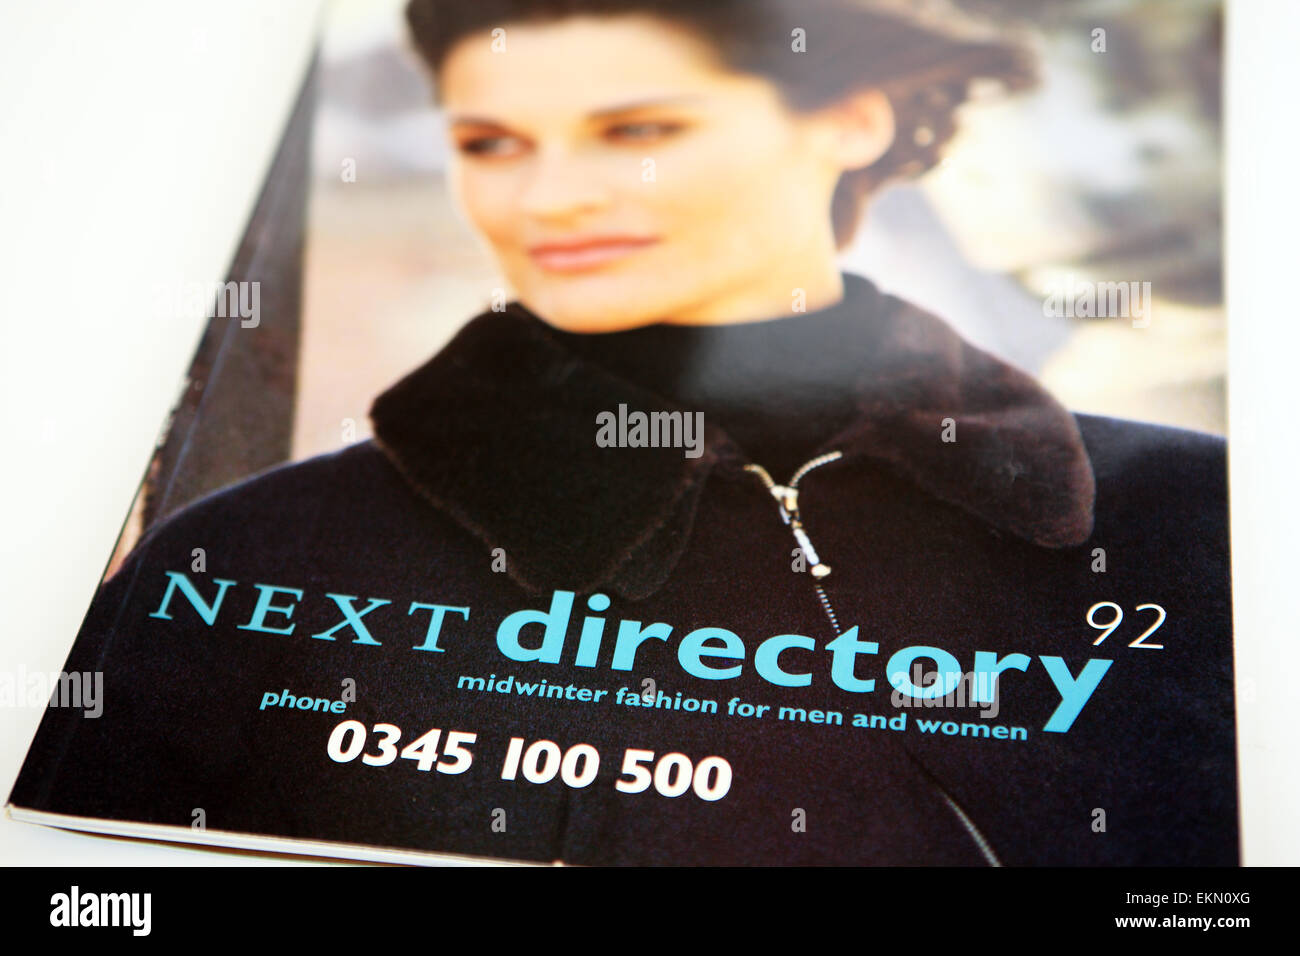 Next directory fashion booklet 1992 for home shopping Stock Photo